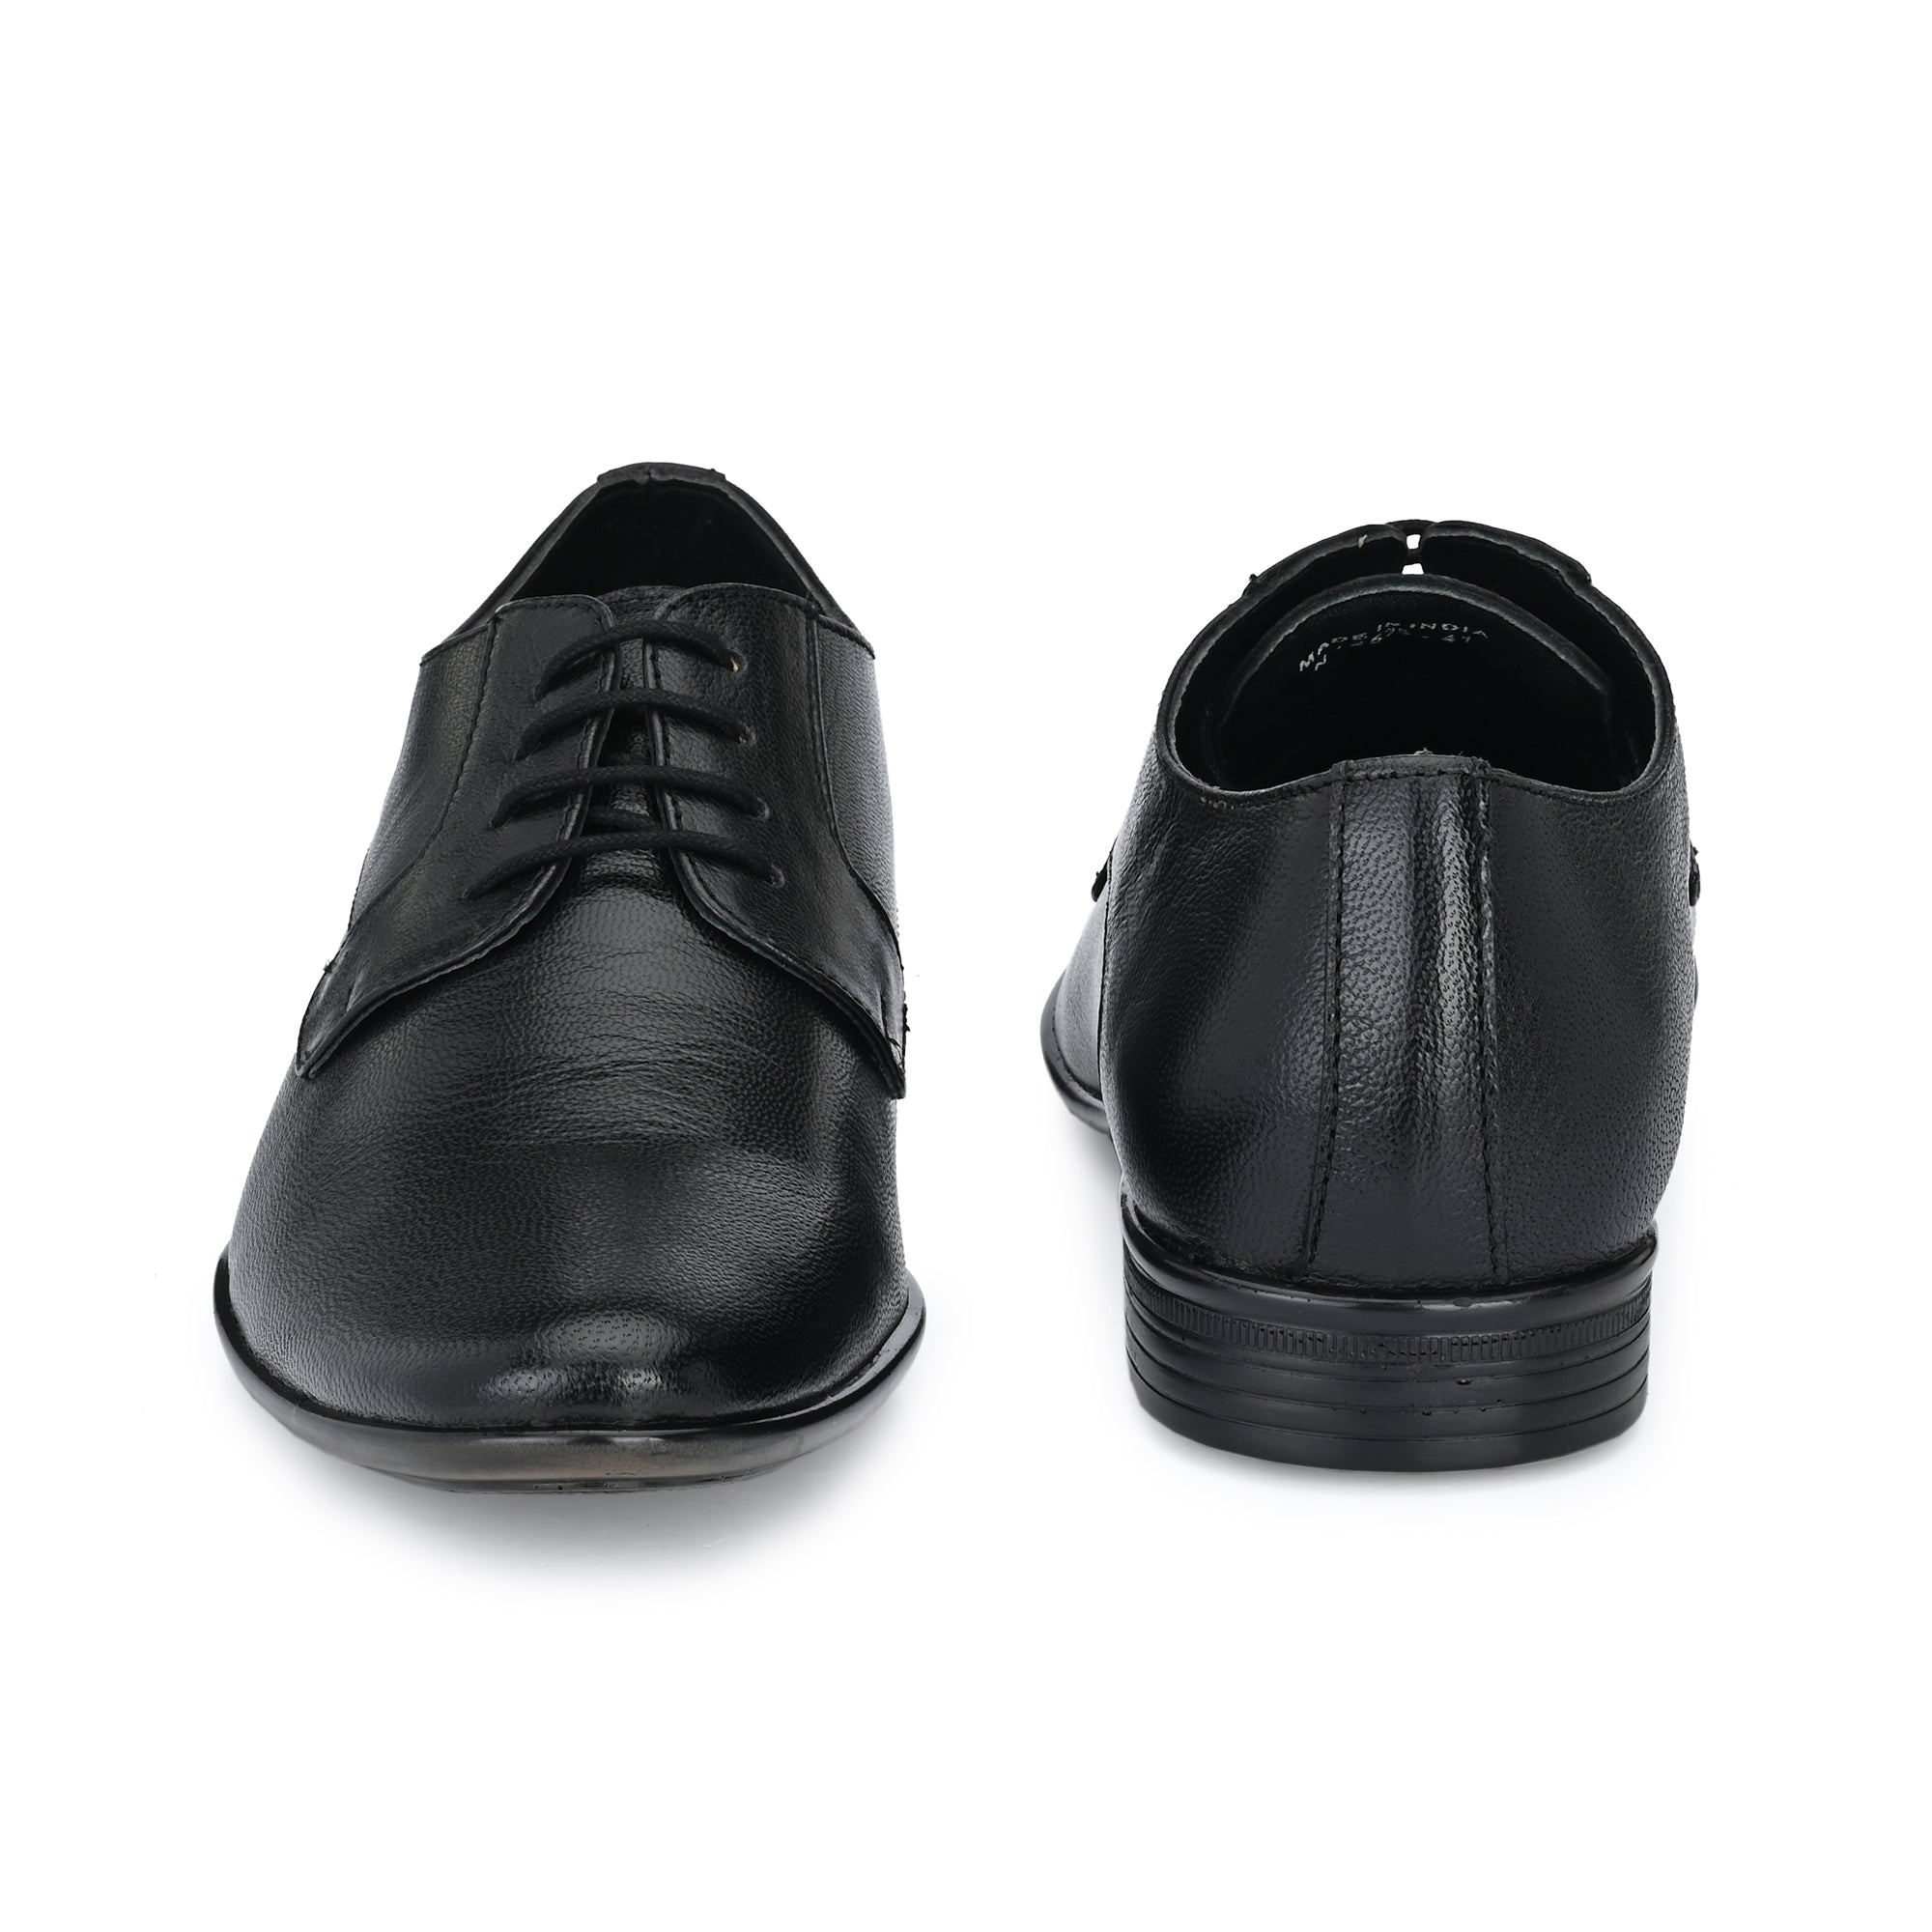 Egoss Leather Formal Lace Up Shoes For Men